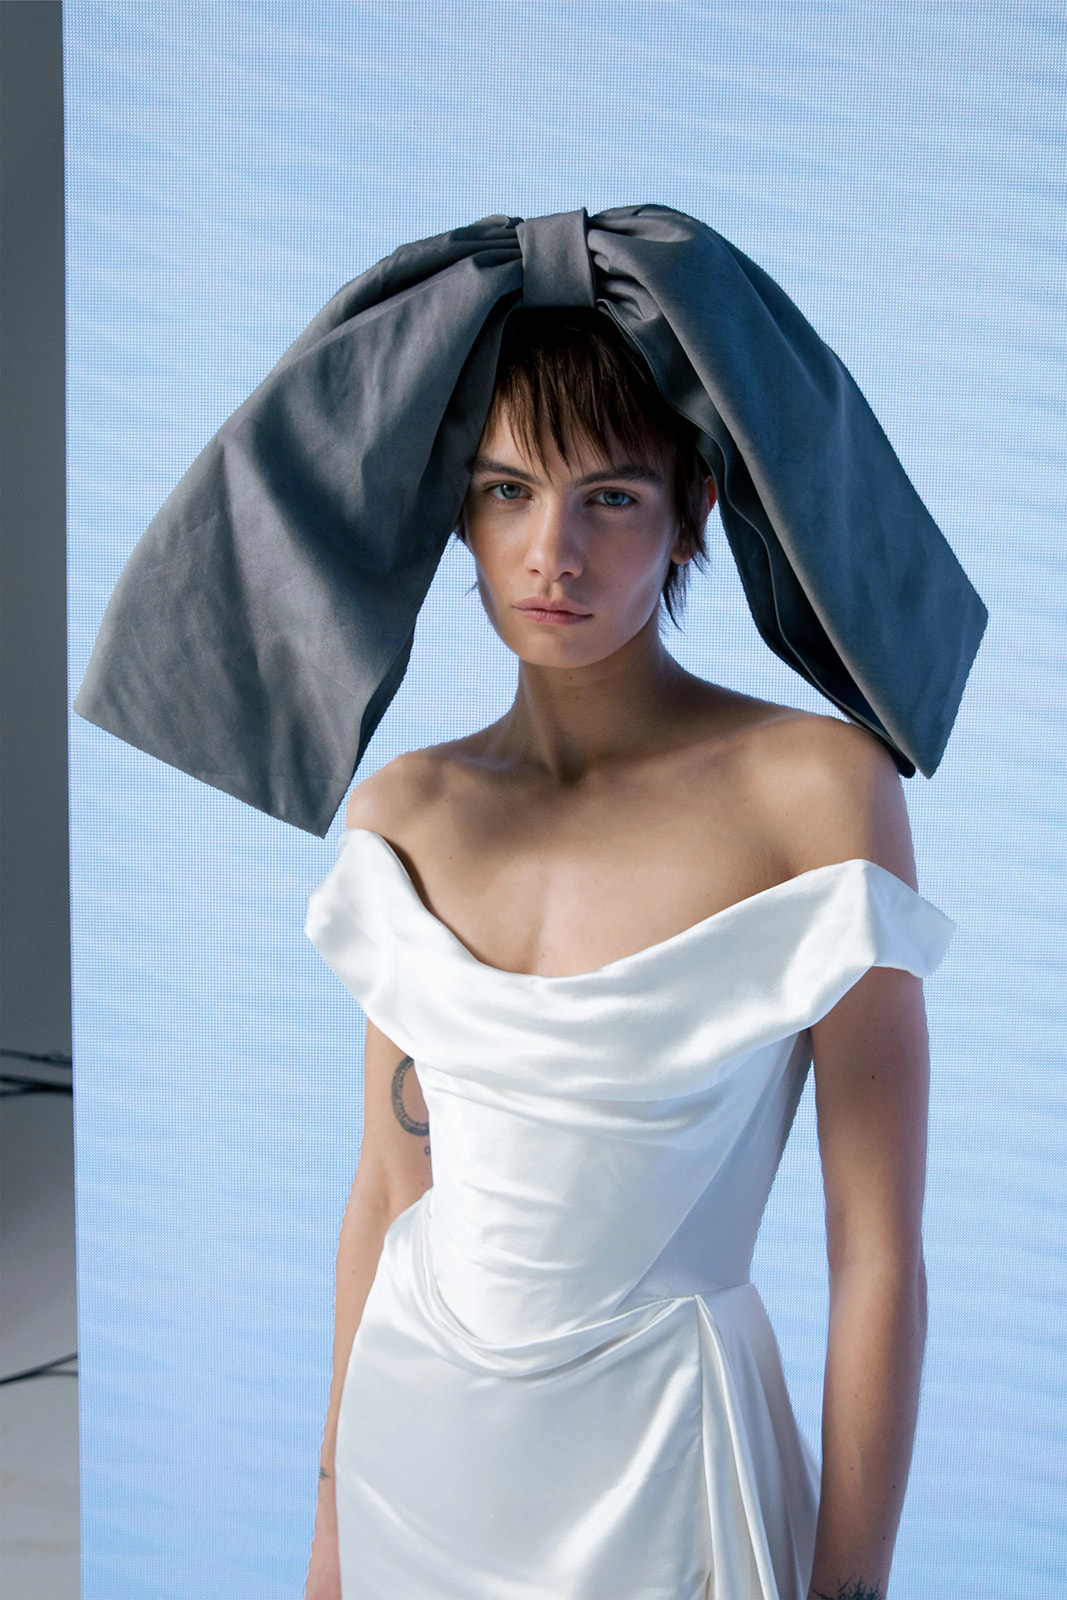 Vivienne Westwood Bridal: With bold cuts, unique draping, and unexpected details.